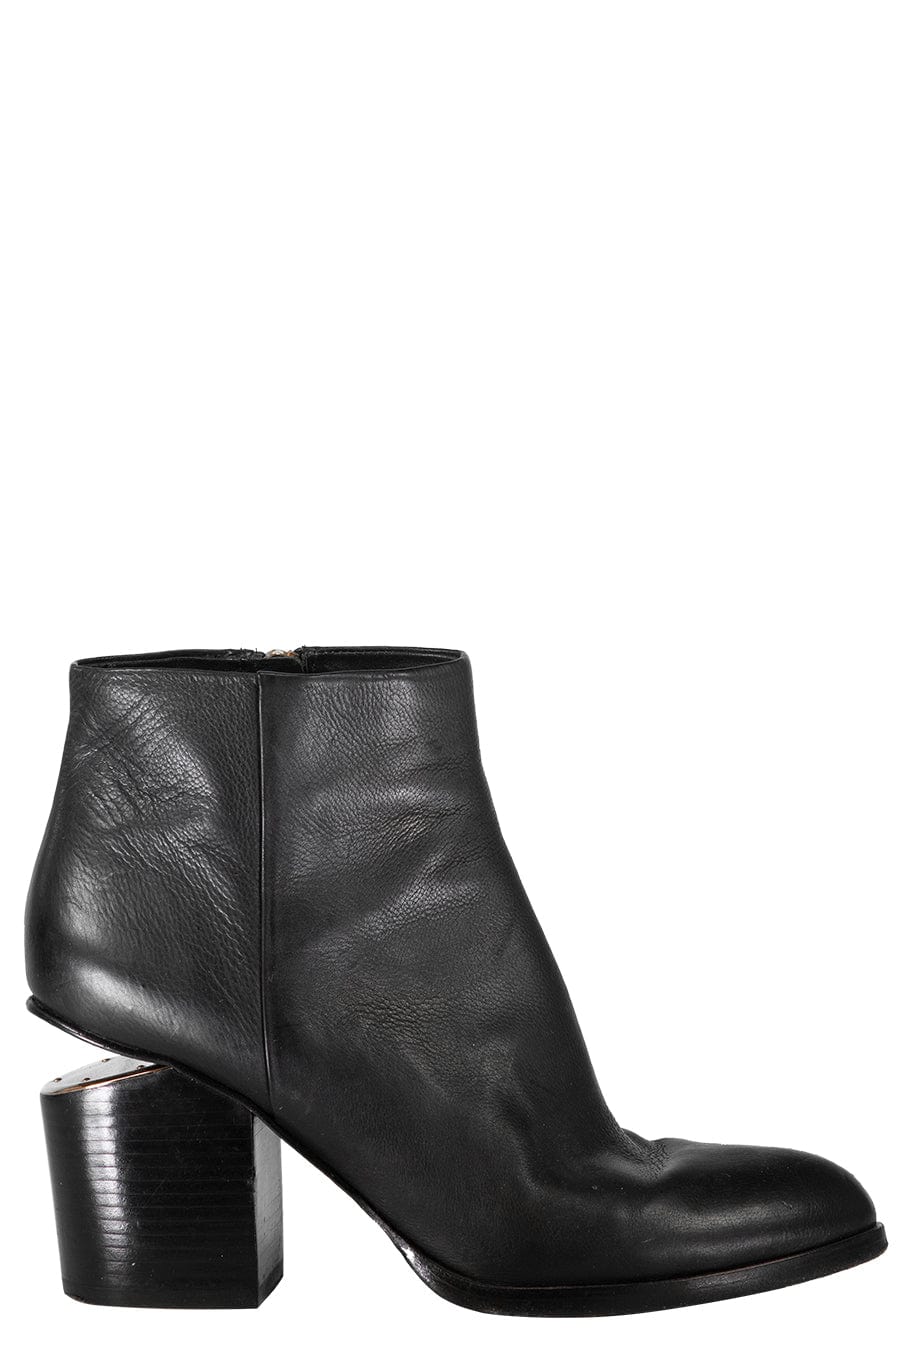 ALEXANDER WANG-Leather Ankle Boots-BLACK